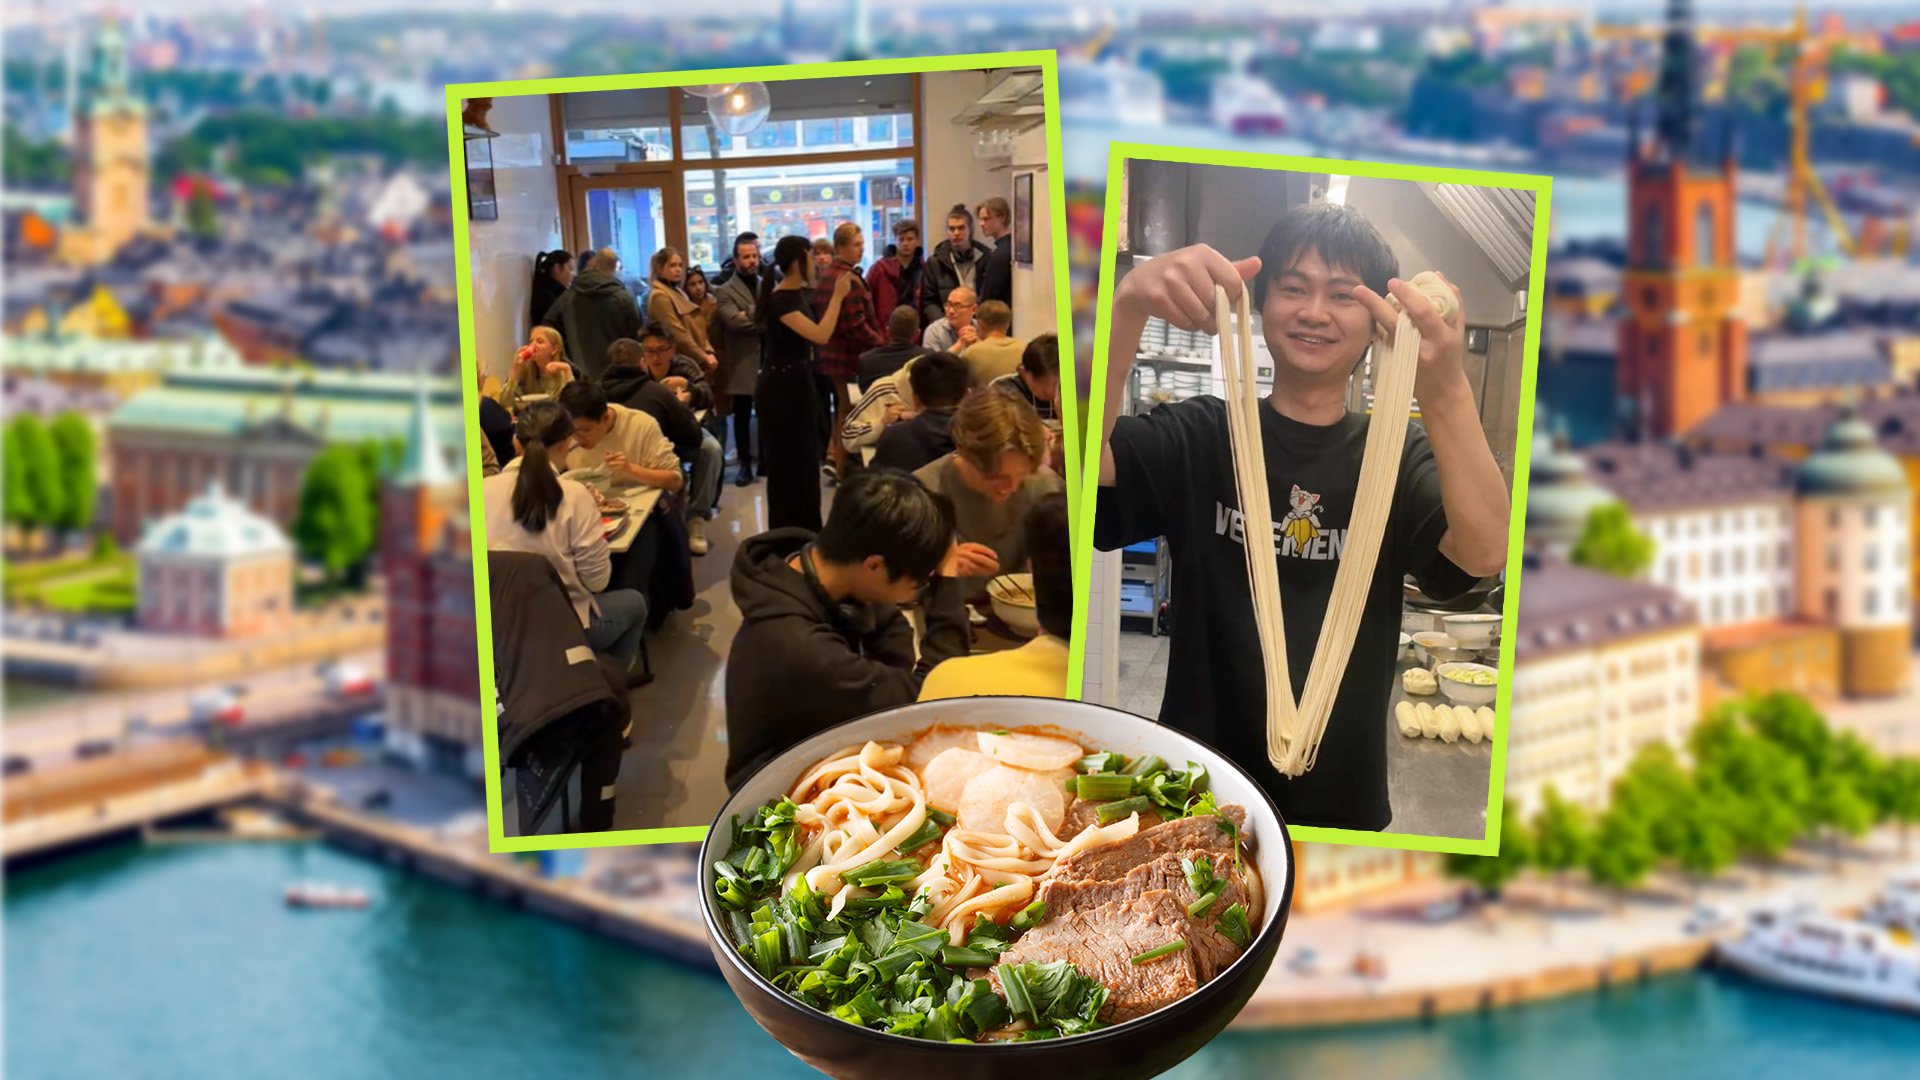 A businessman from China has taken Sweden by storm with his hometown recipe for ramen noodles and is making US$140,000 a month. Photo: SCMP composite/Shutterstock/Douyin/Jimu News